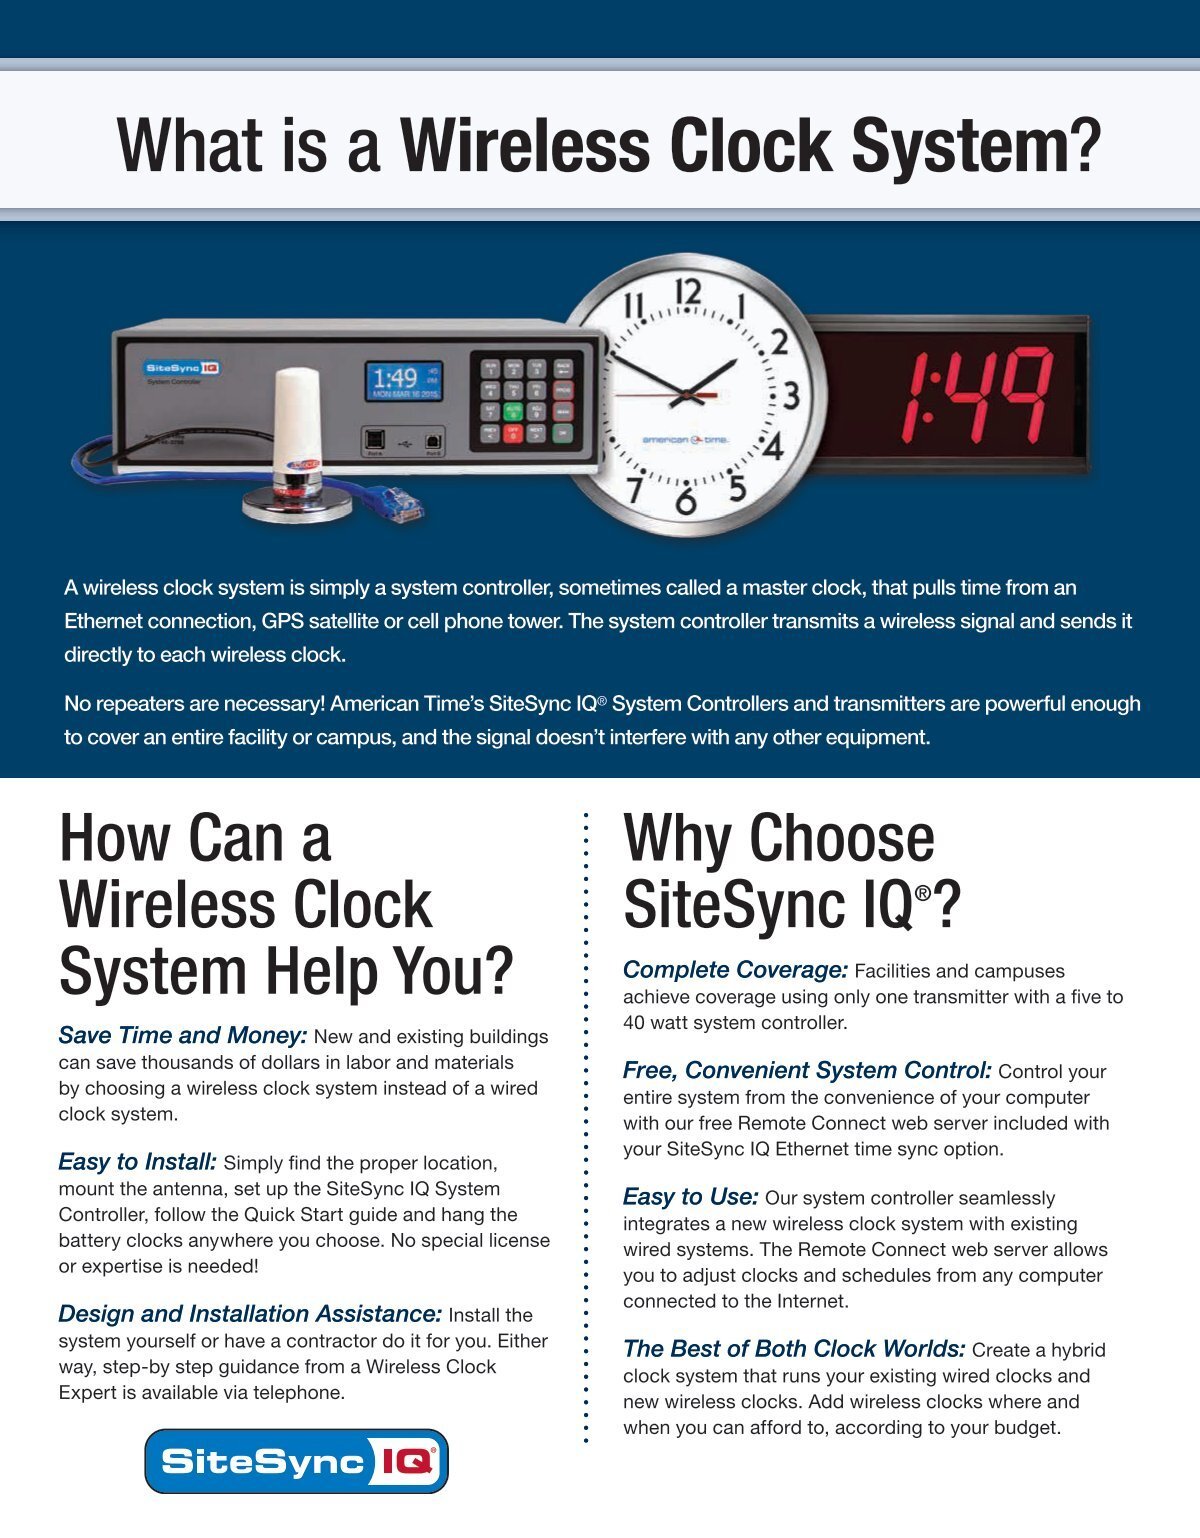 What is a Wireless Clock System?